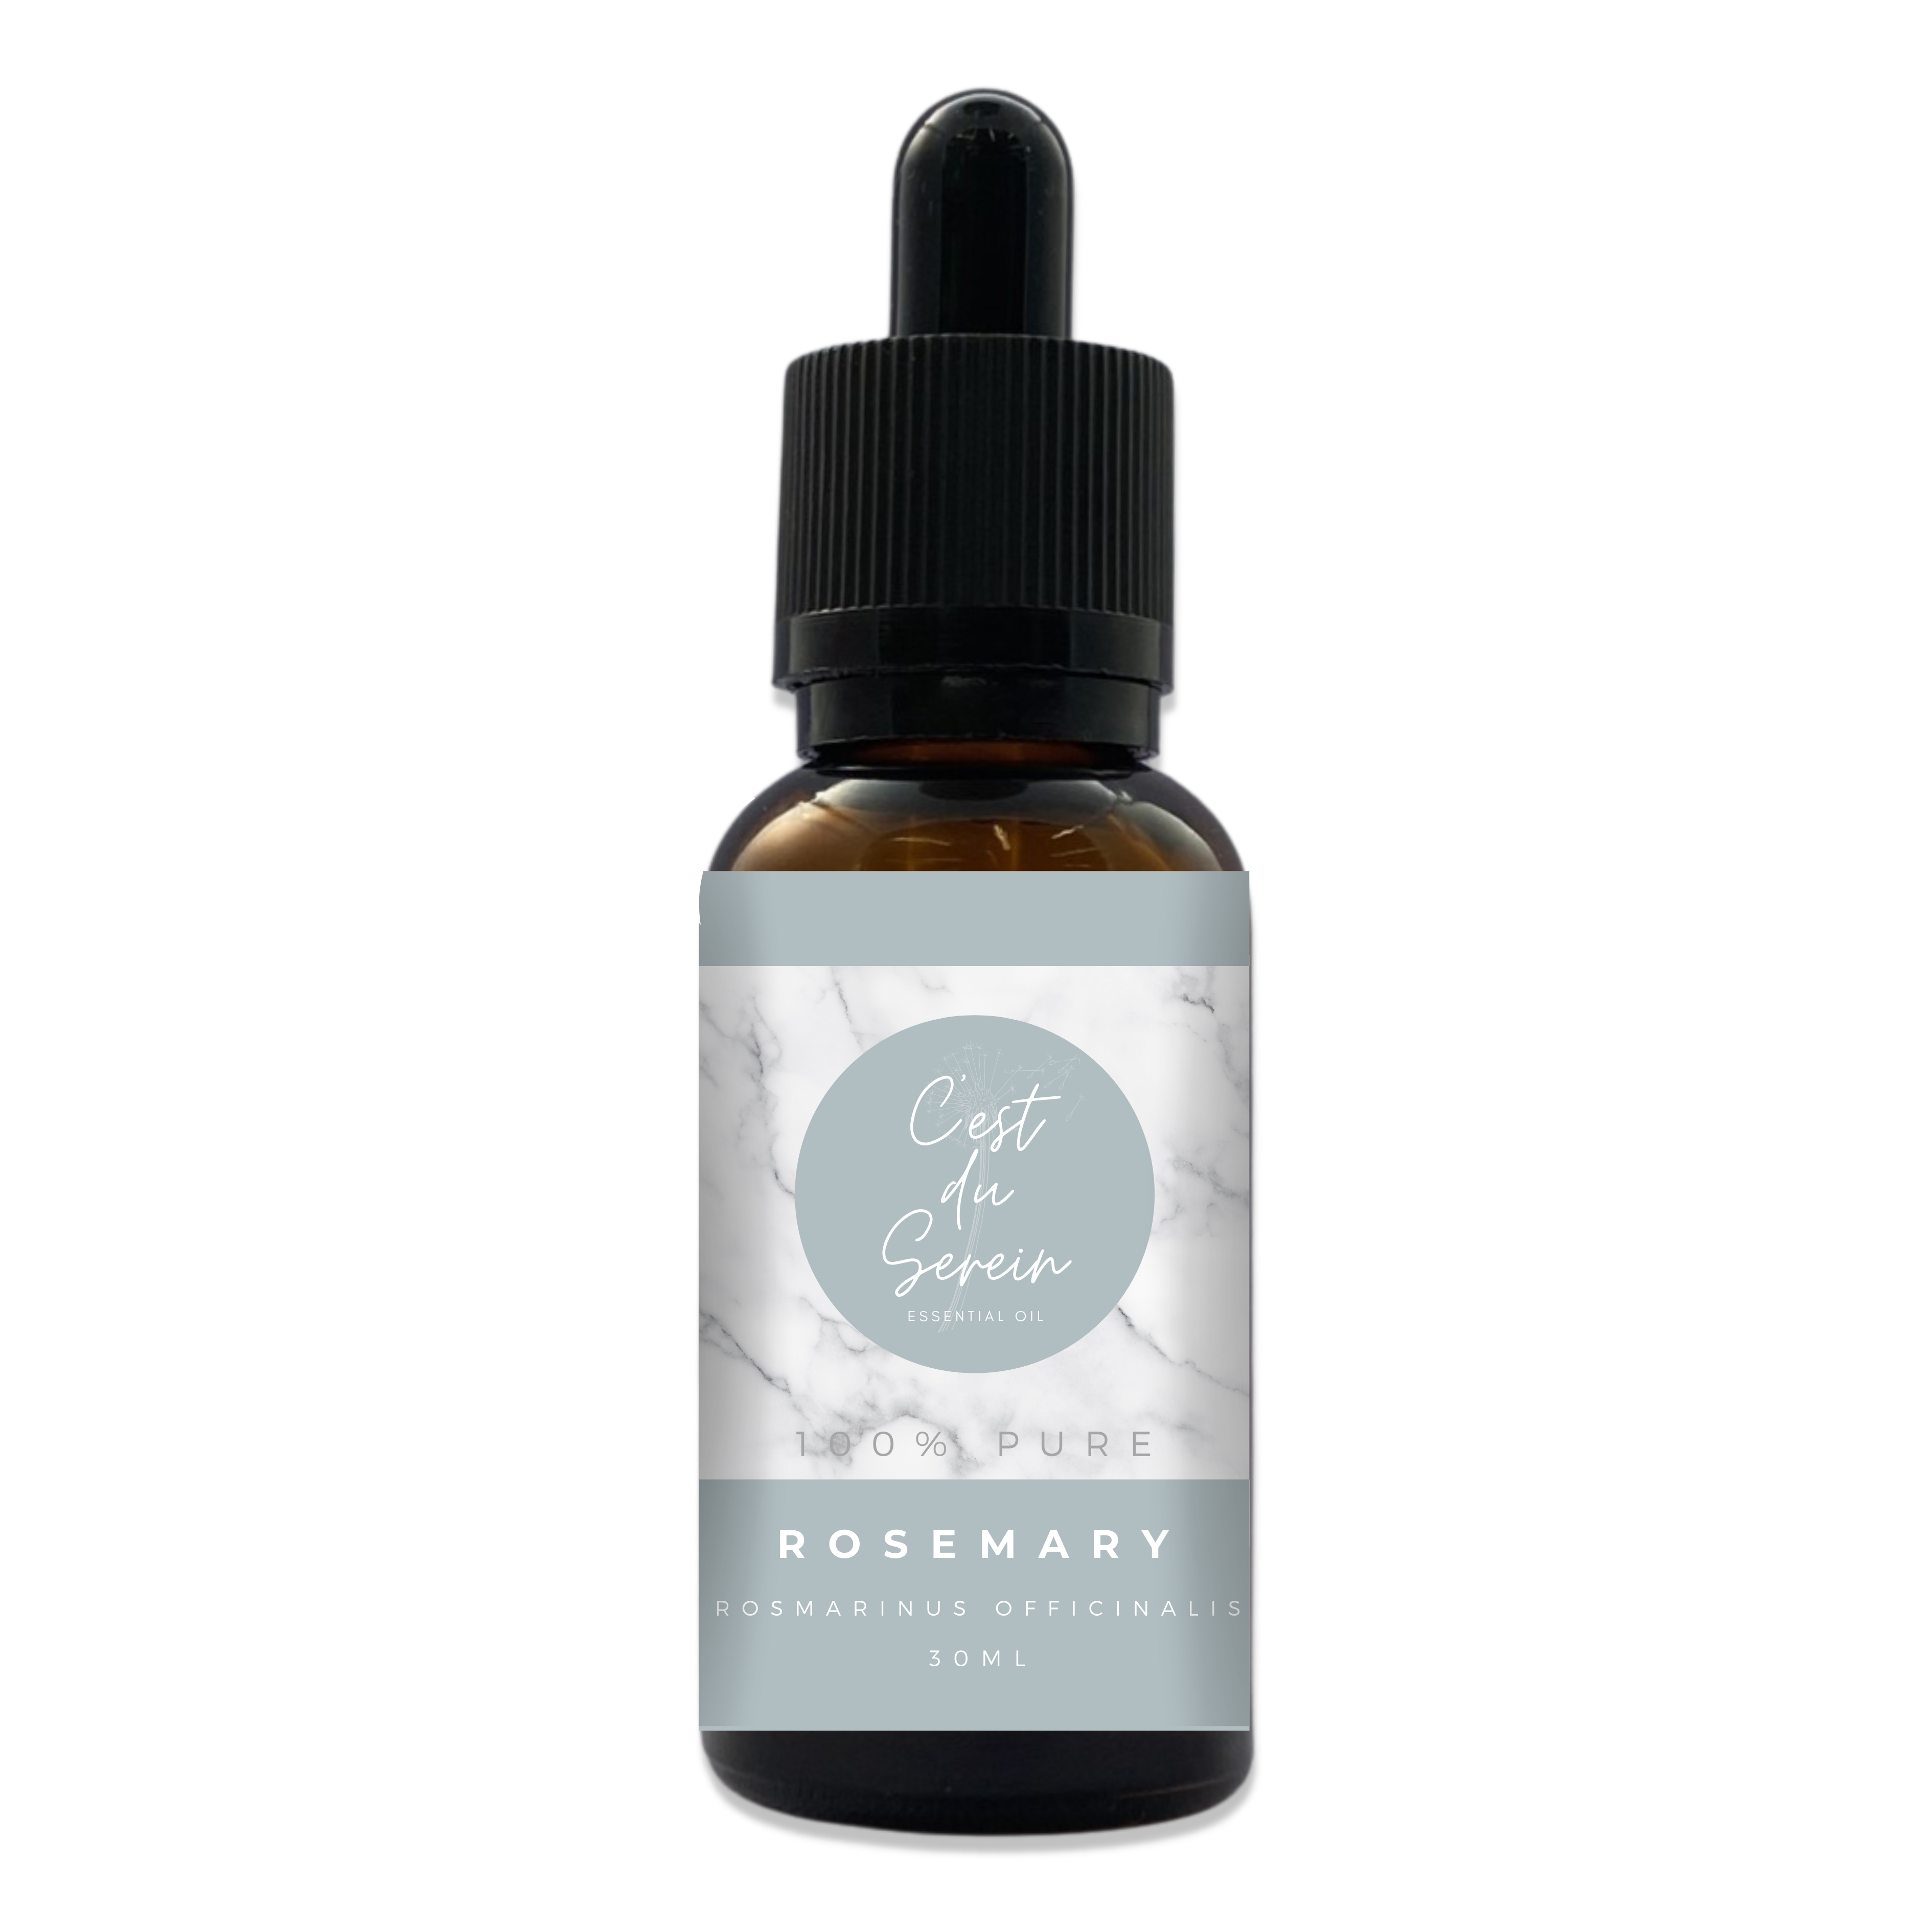 Rosemary 100% Pure Essential Oil